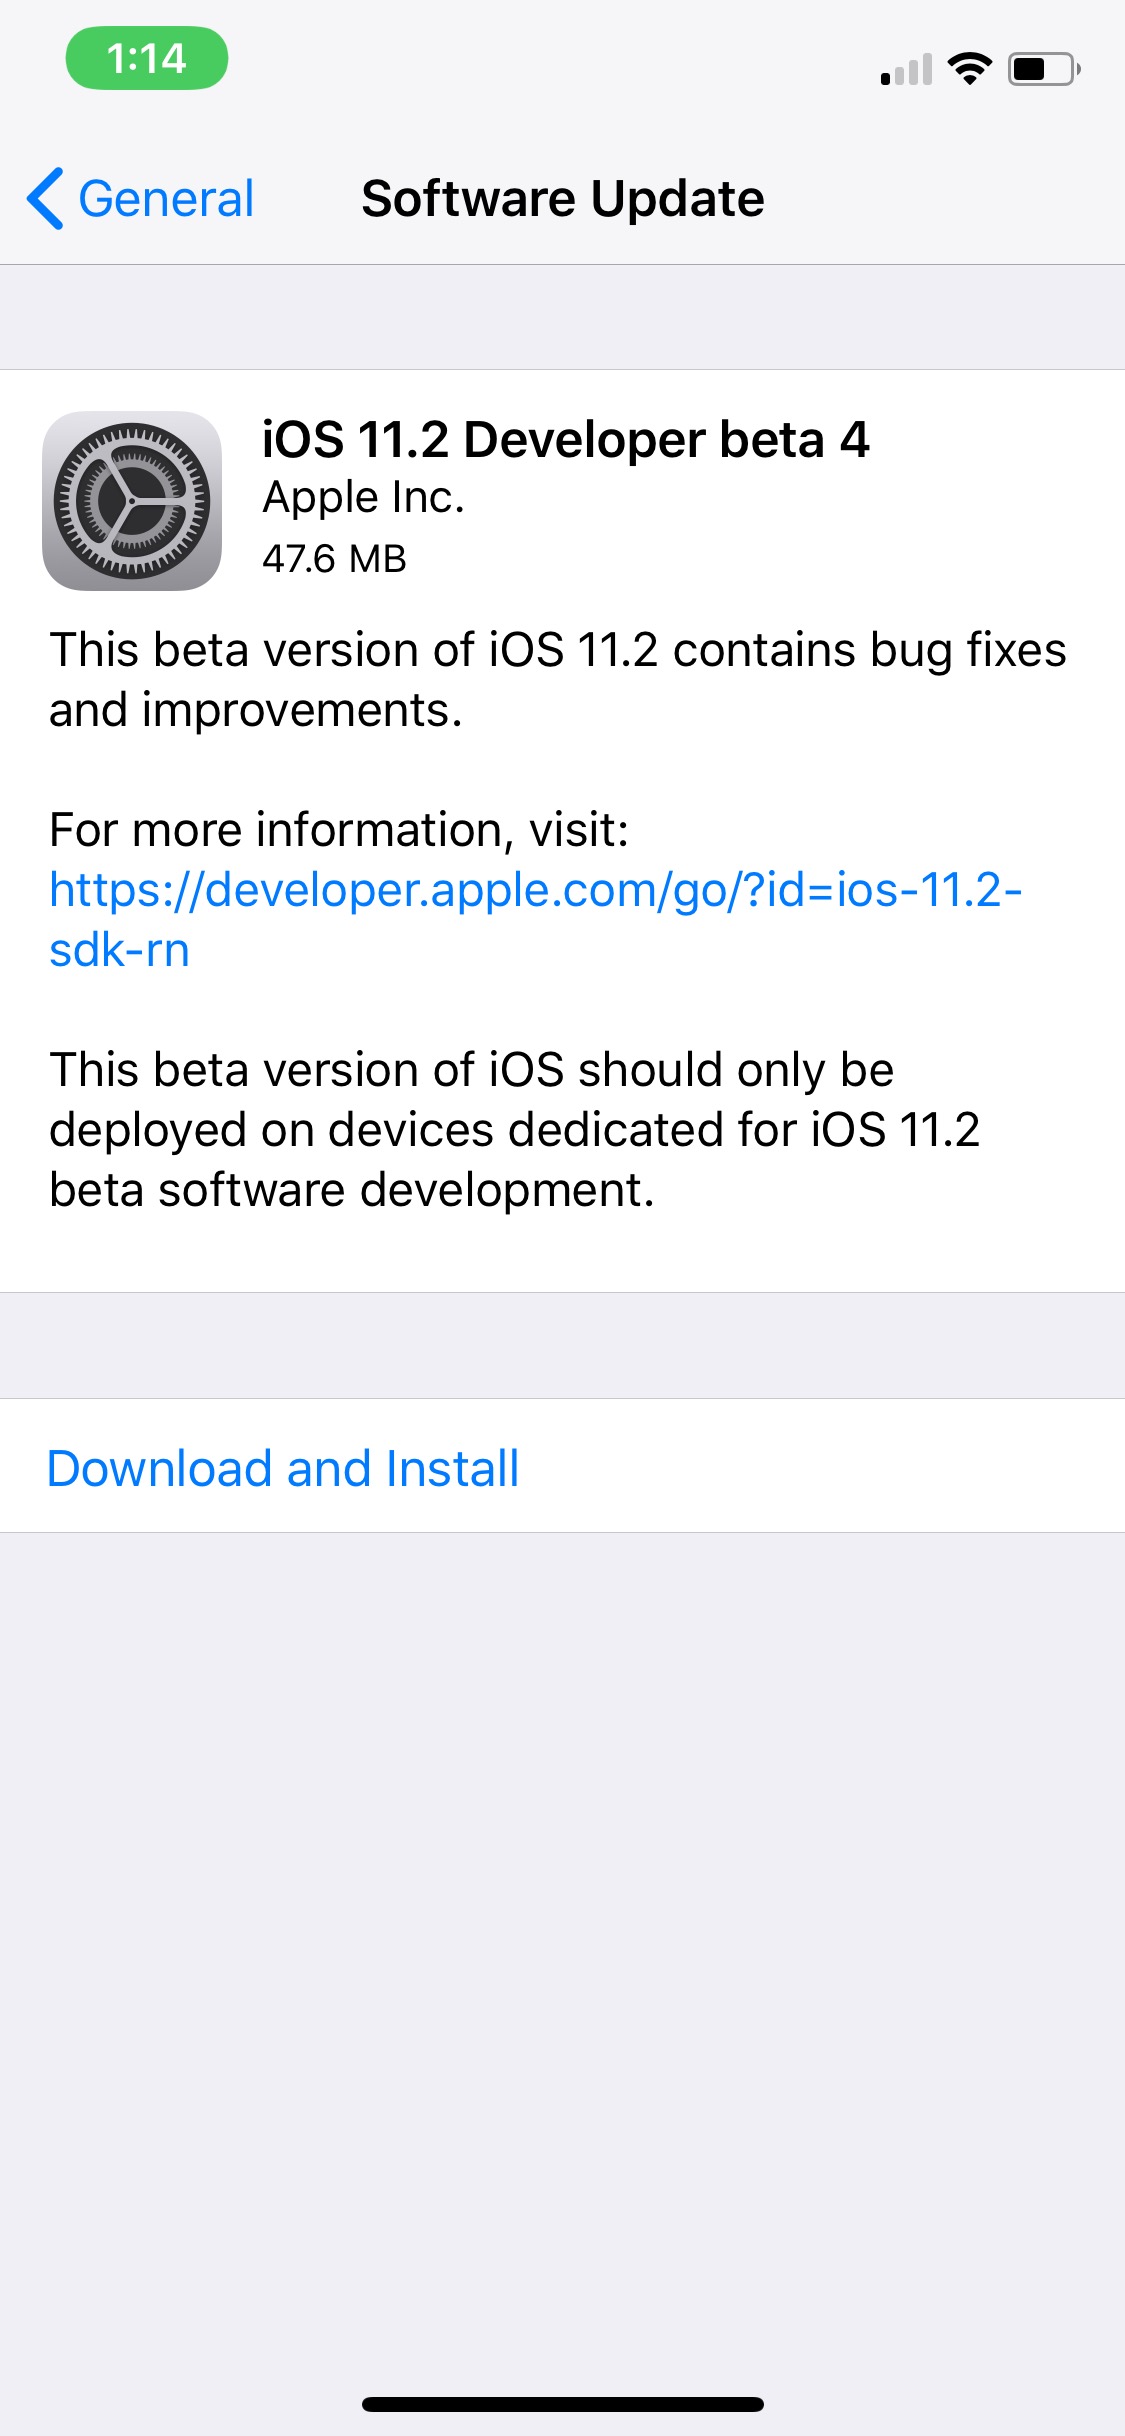 Apple Releases iOS 11.2 Beta 4 to Developers [Download]